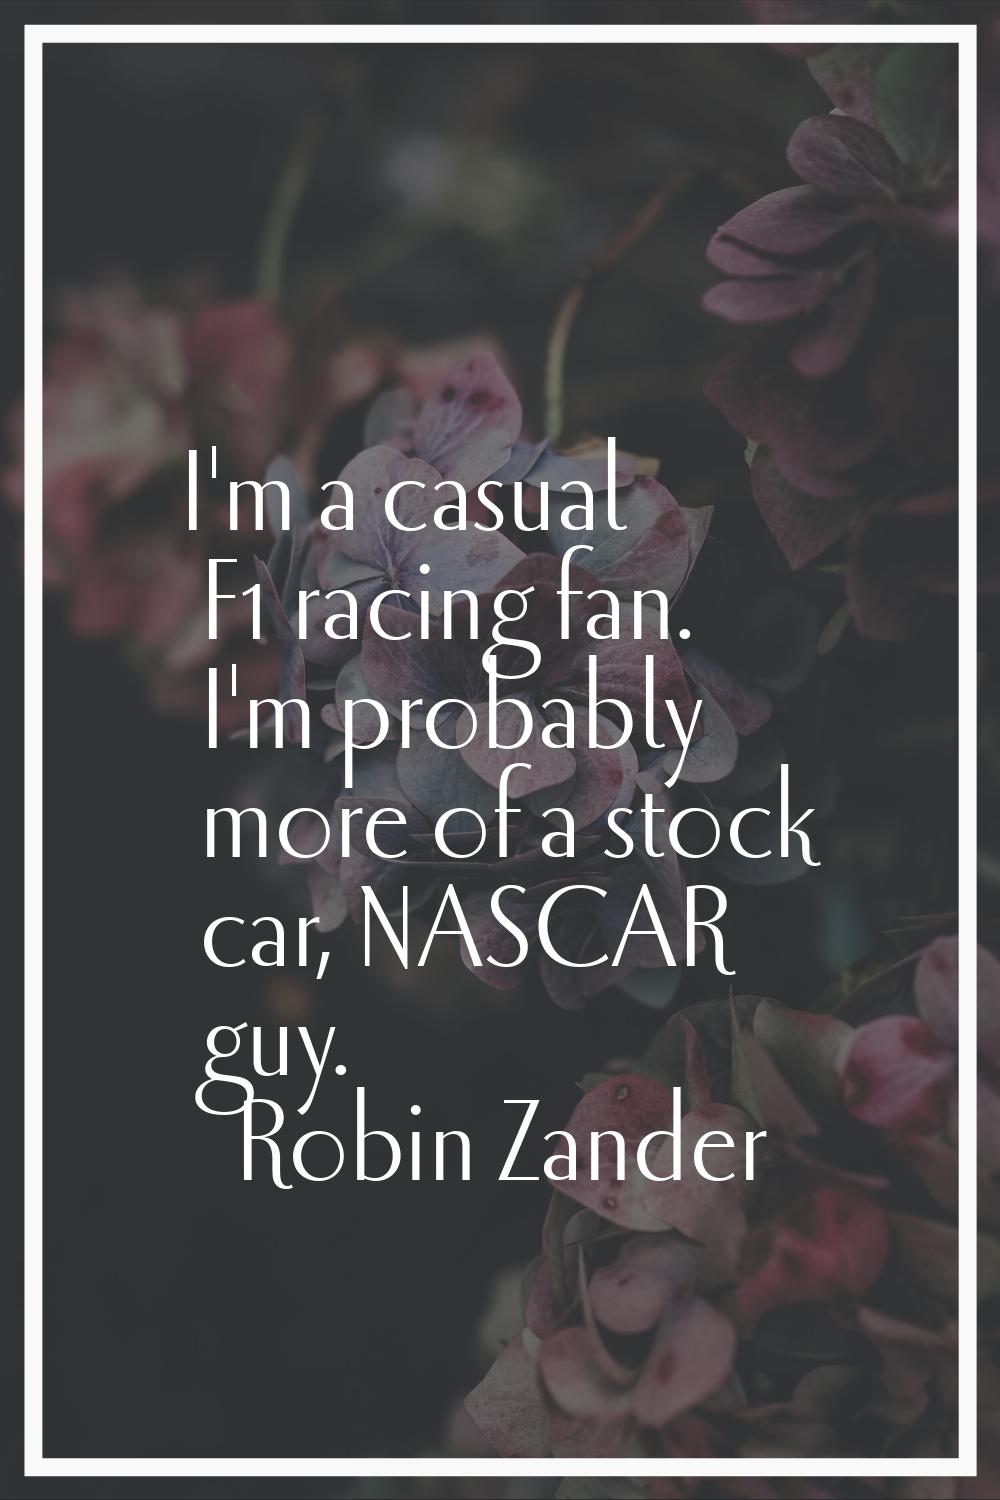 I'm a casual F1 racing fan. I'm probably more of a stock car, NASCAR guy.